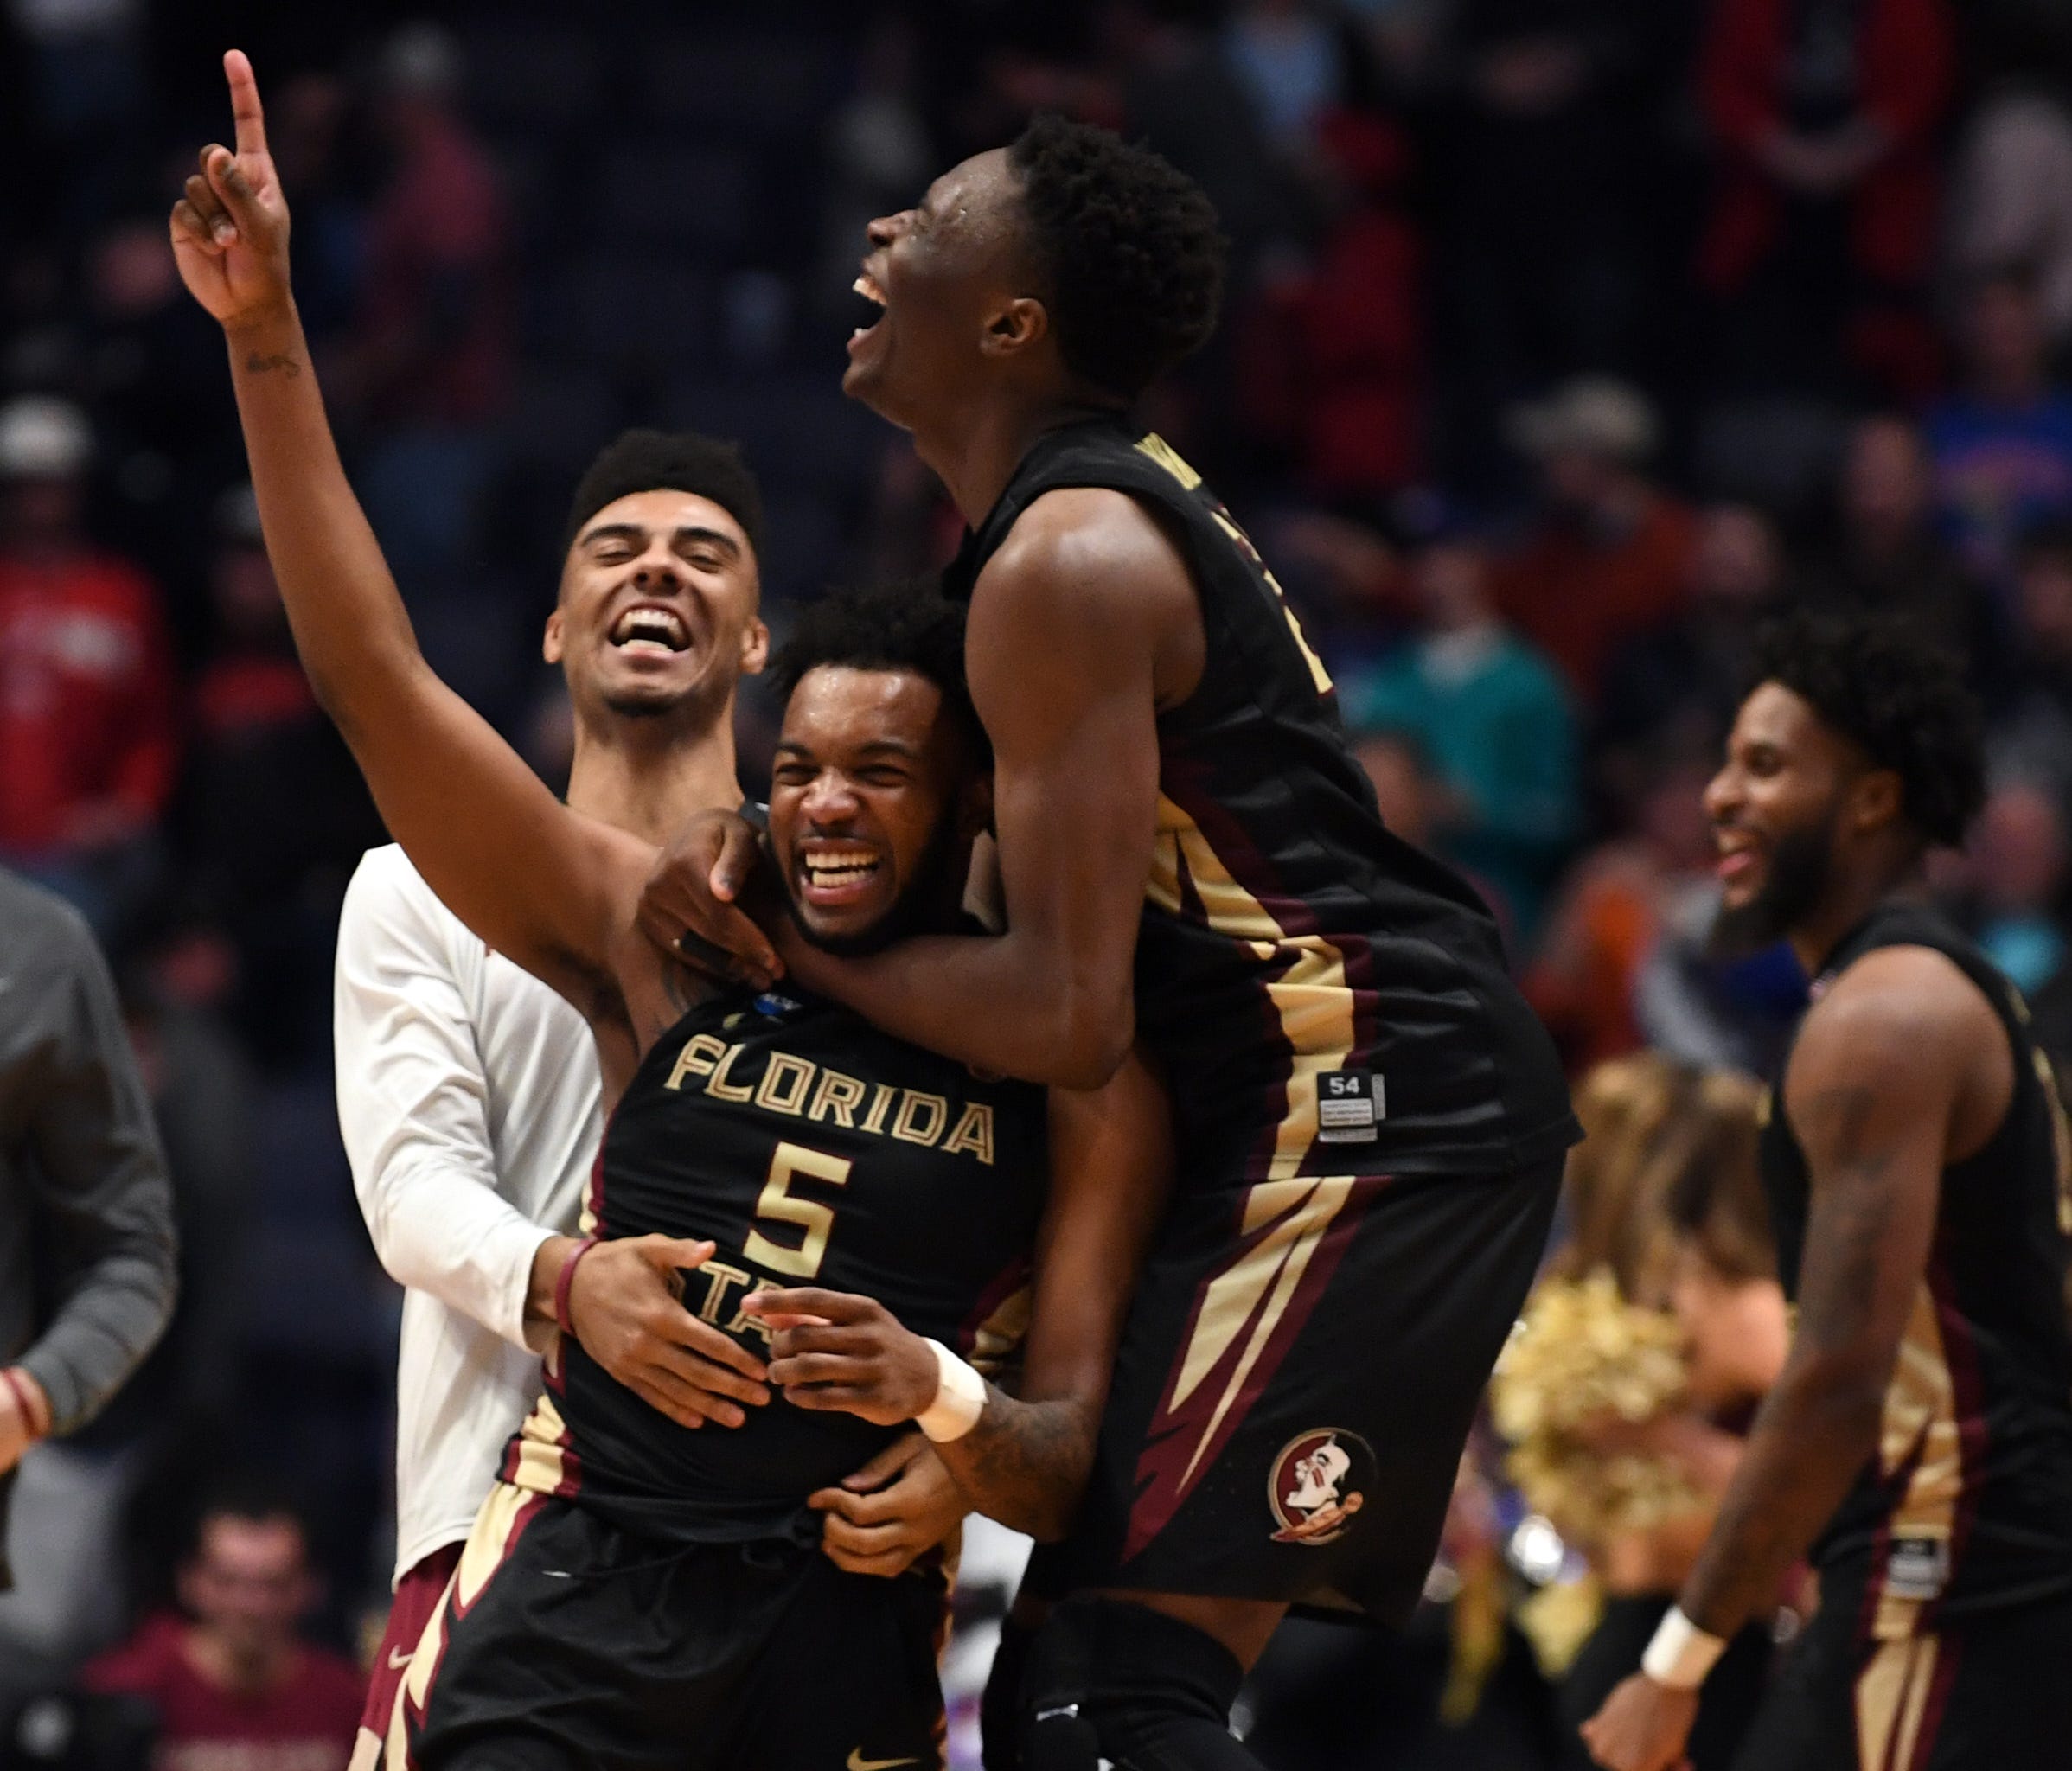 Florida State Seminoles guard PJ Savoy (5) celebrates after defeating the Xavier Musketeers in the second round of the 2018 NCAA Tournament at Bridgestone Arena.